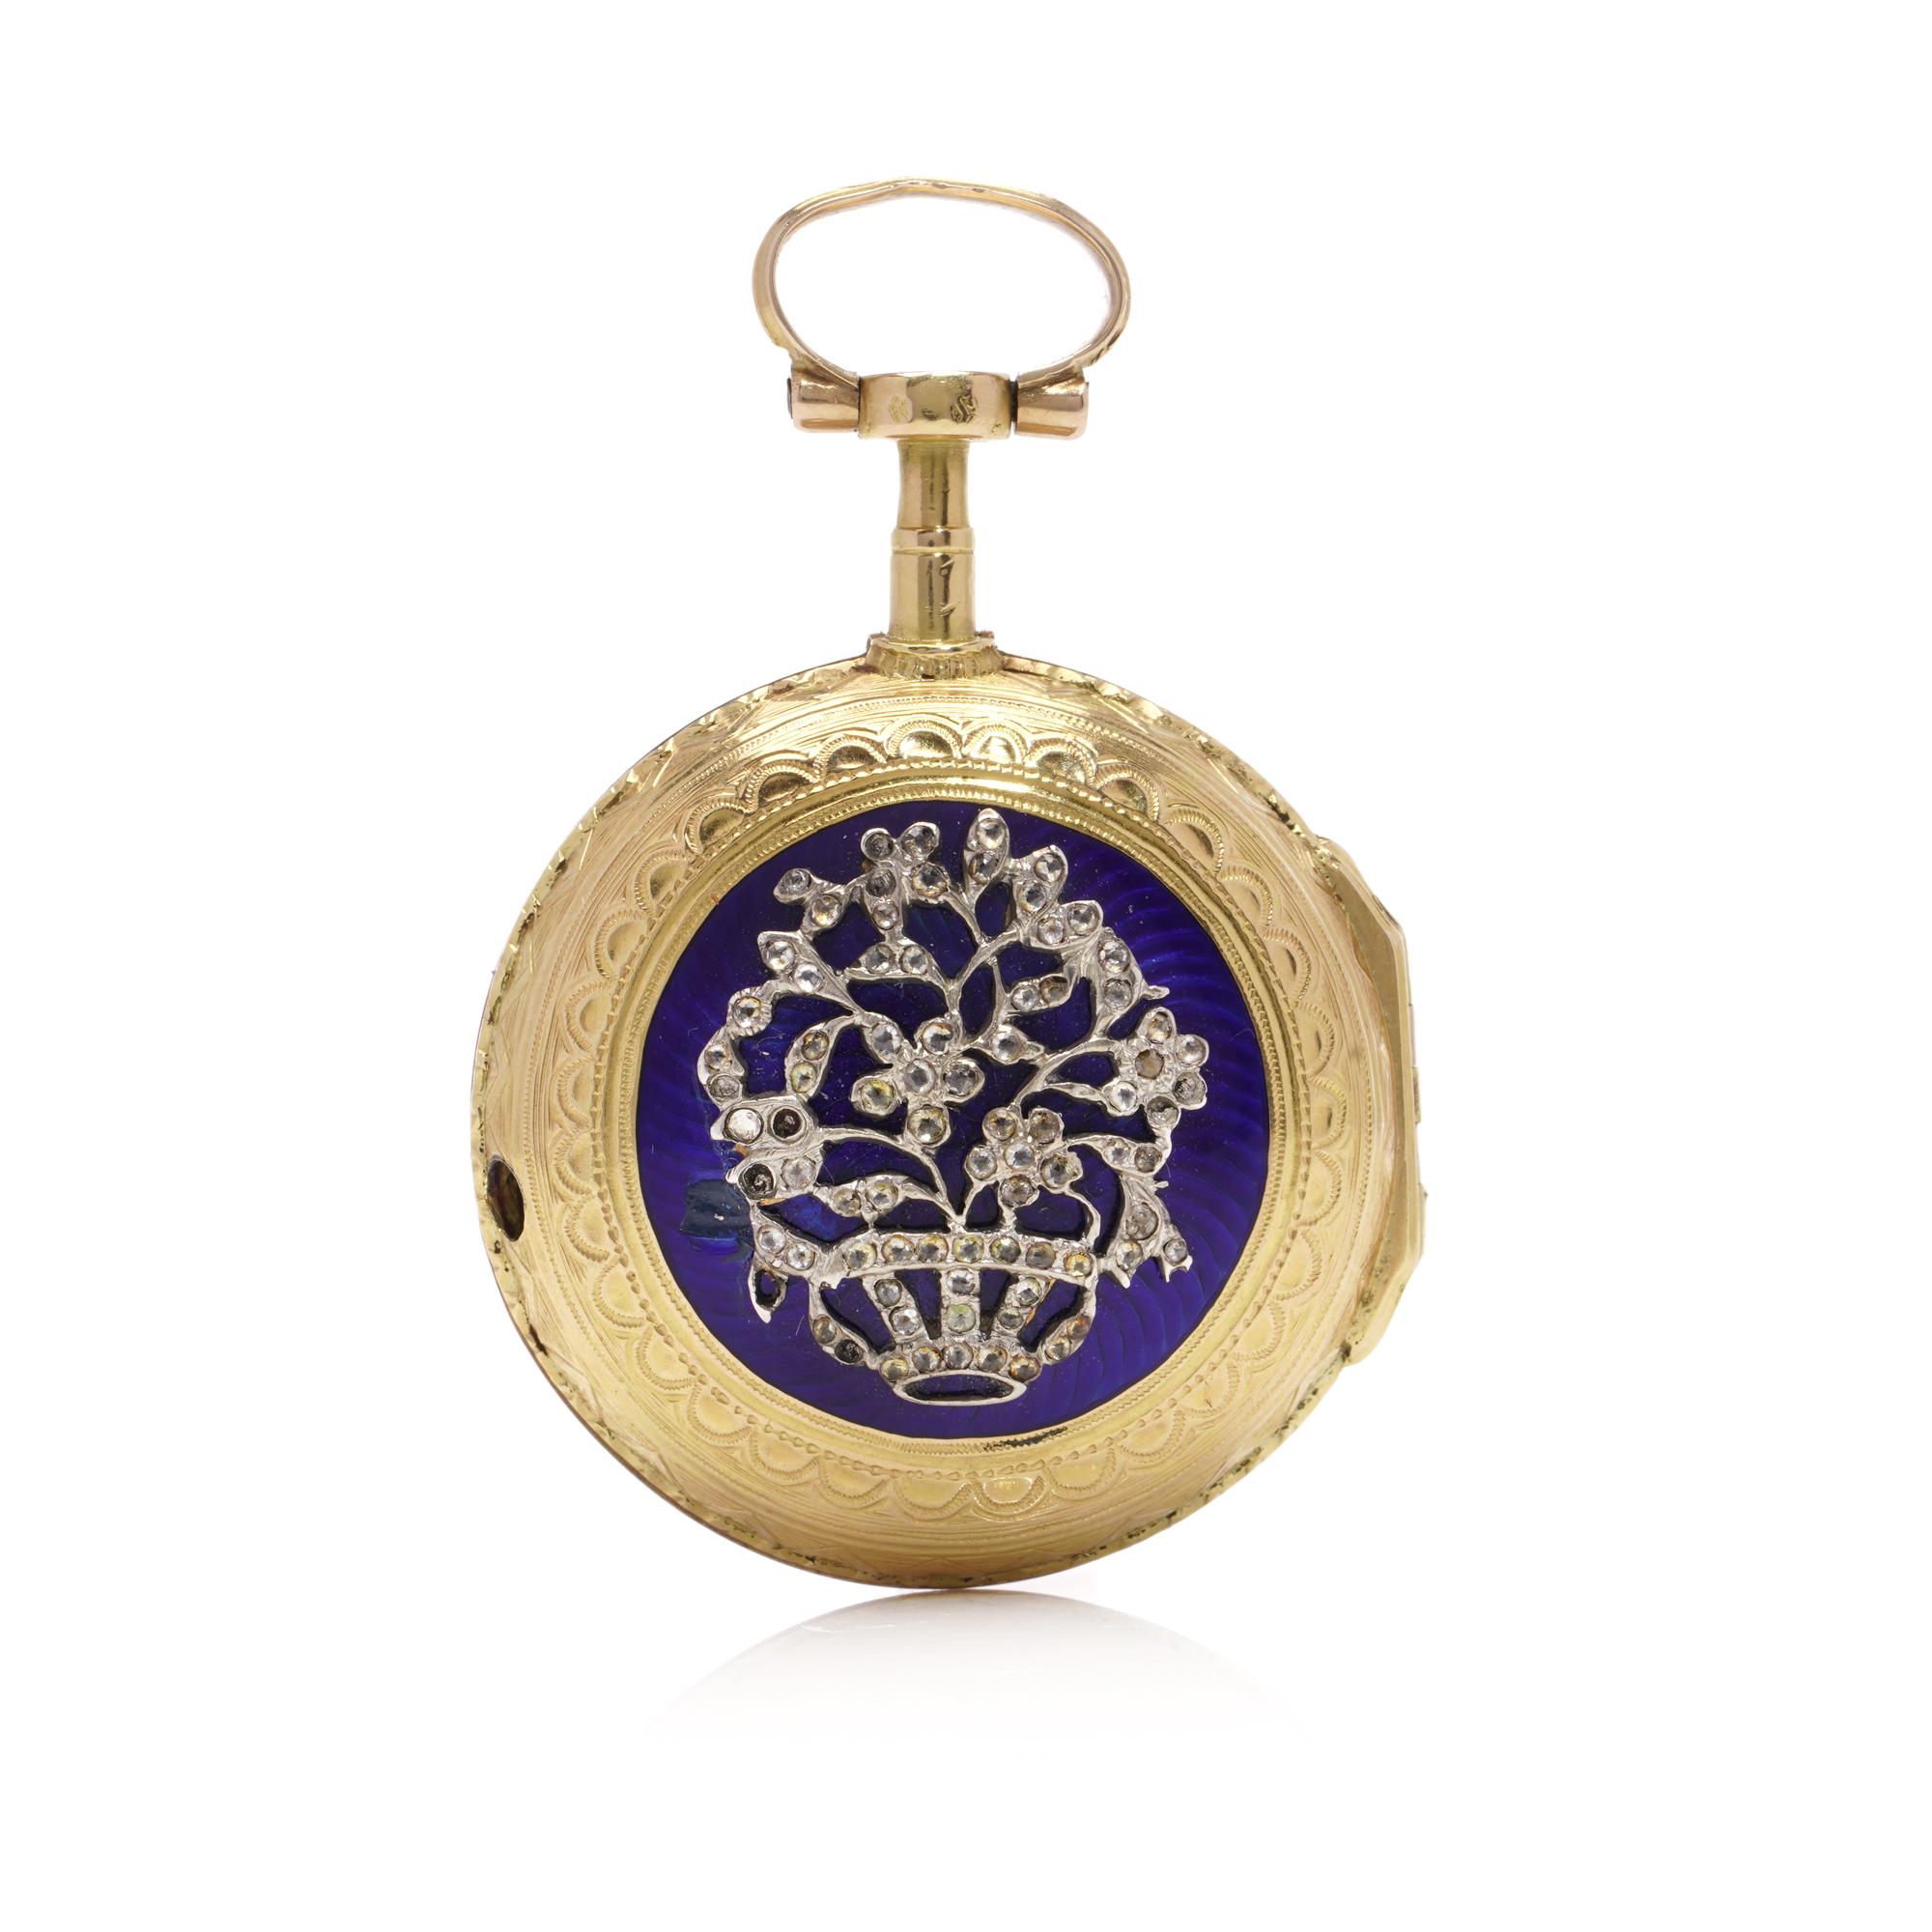 Antique Late 18th-century Lépine Verge movement key wind 18kt gold, a silver pocket watch with a case decorated with blue enamel, and a silver casket of flower bouquet, set of paste.

Hallmarked on movement, French 18kt. gold standard marks (